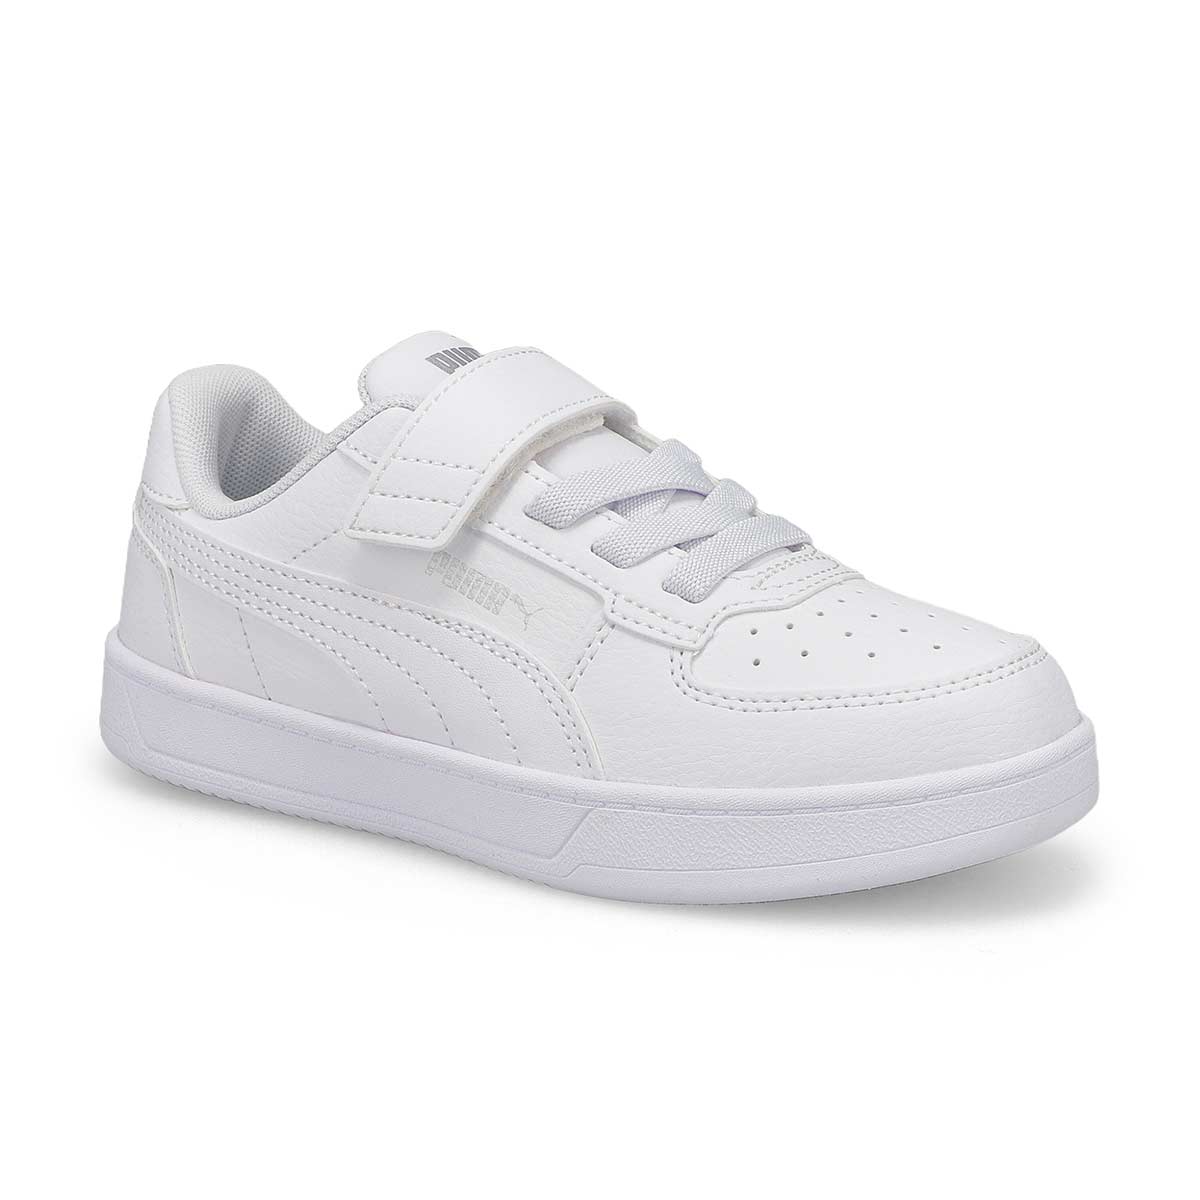 Kids Caven 2.0 AC + PS Lace Up Sneaker - White/Silver